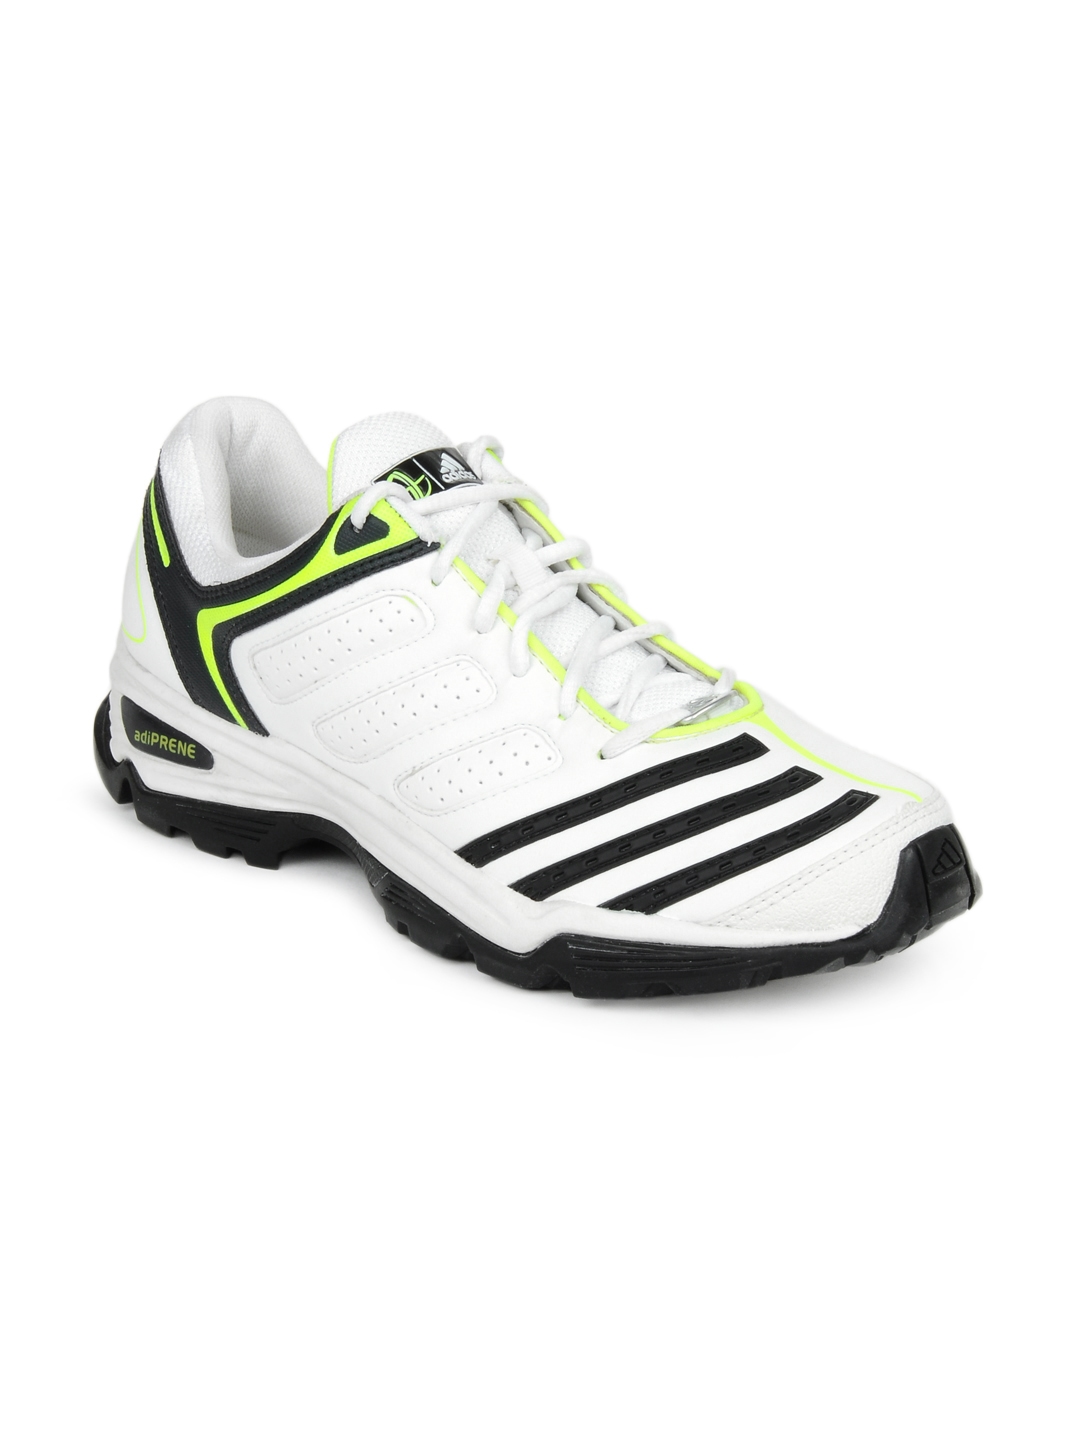 adidas 22 yds trainer 2 cricket shoes